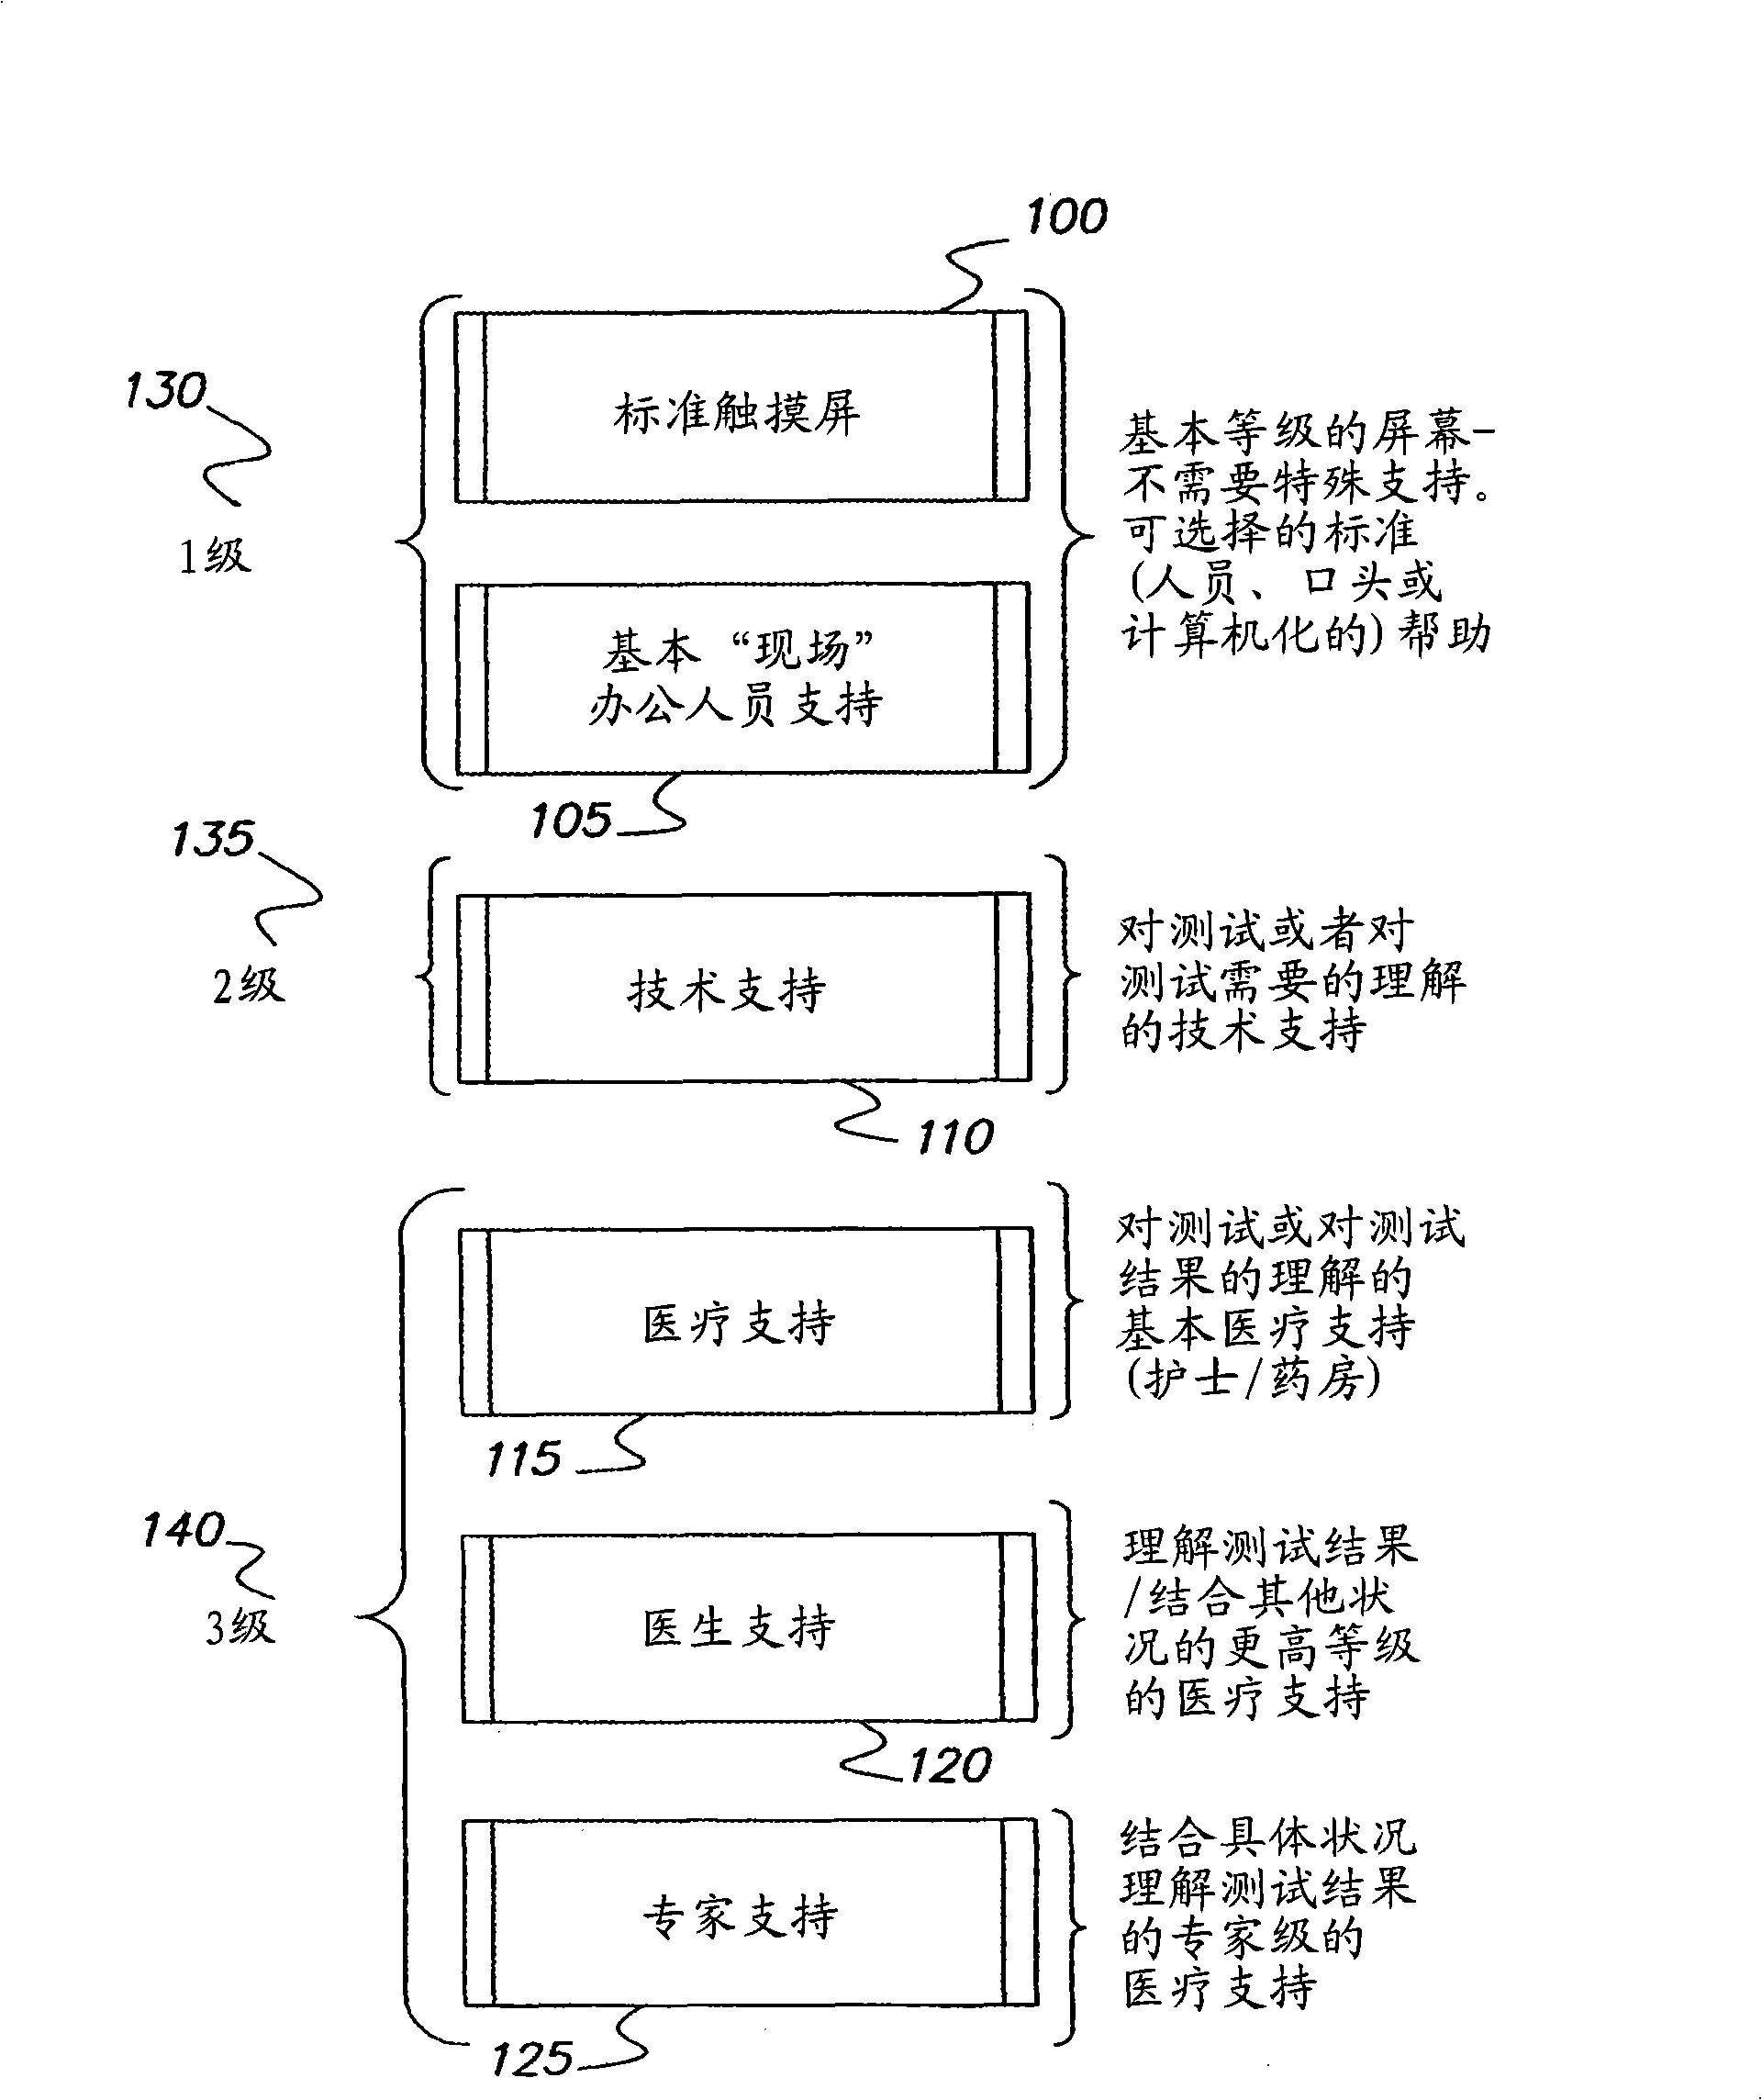 Method of providing automated medical assistance